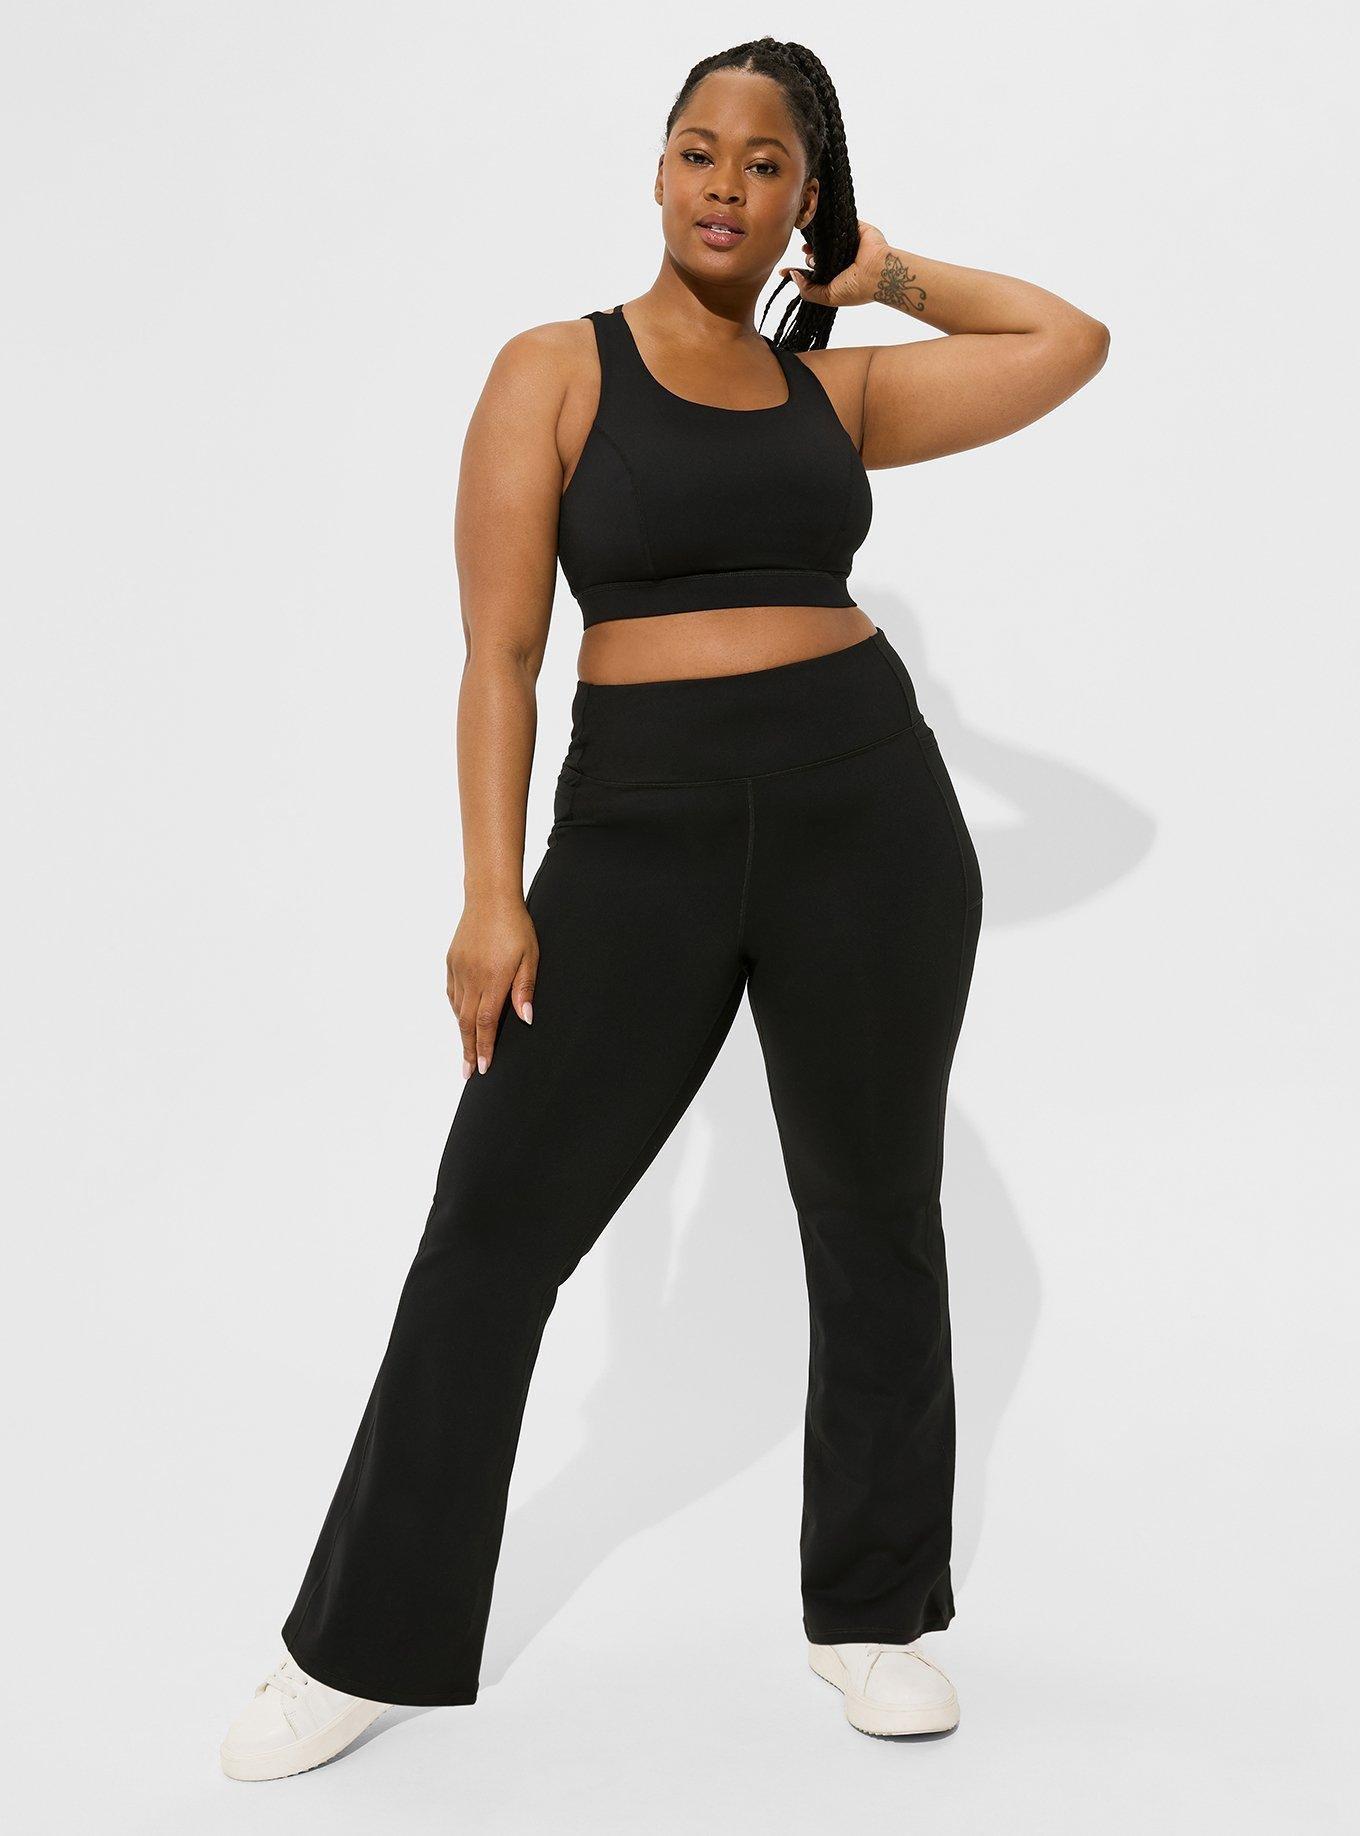 Buy Low Rise Yoga Pants Bootcut Pants Flare Bottom Exercise Pants Casual  Pants With 34 Long Inseam Online in India 